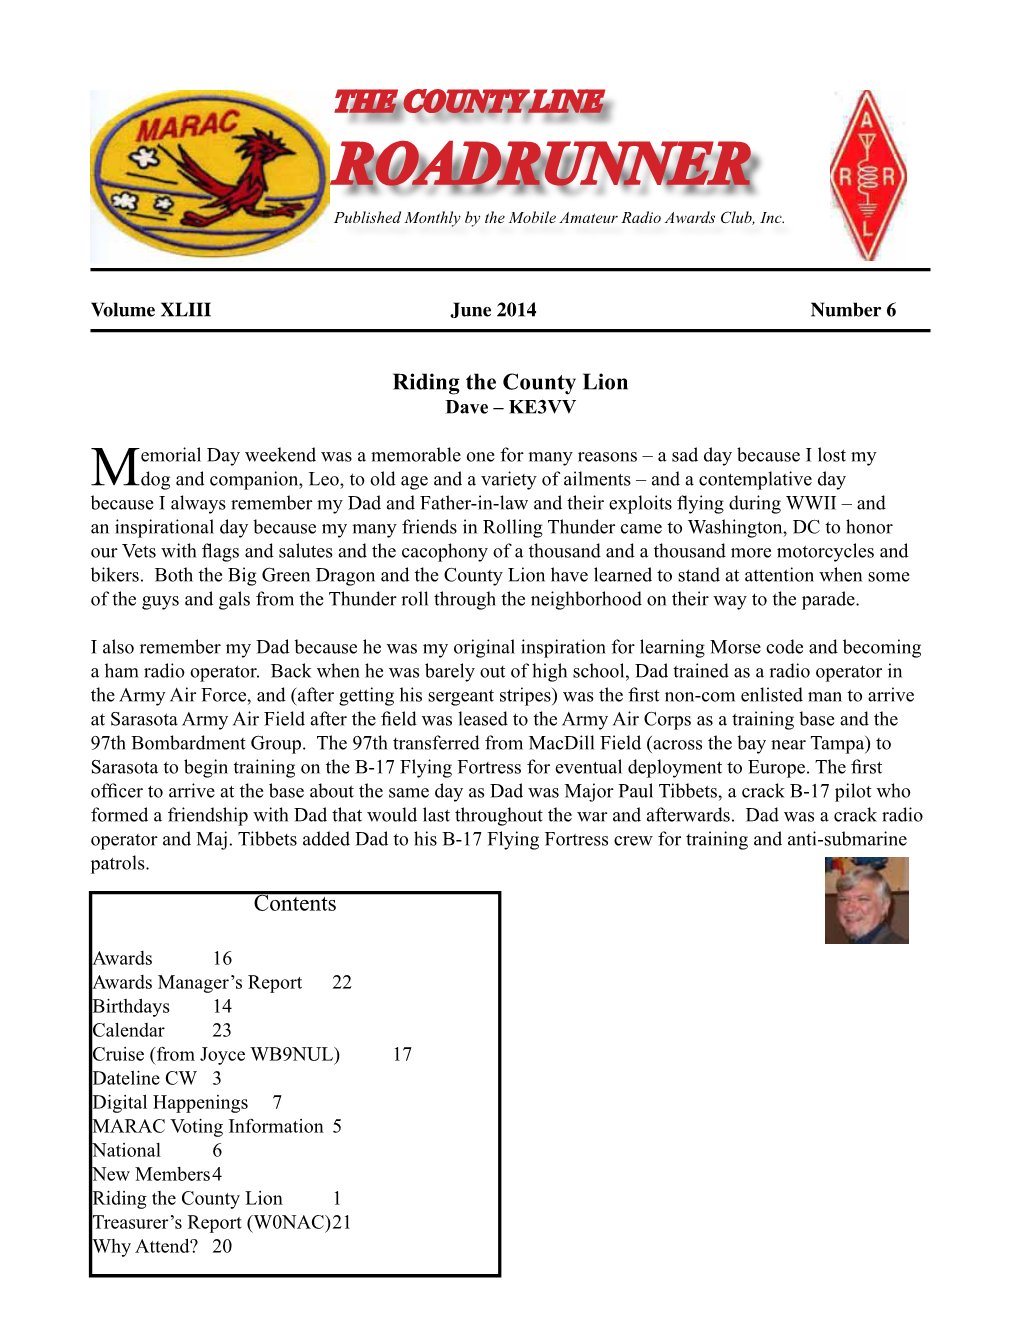 ROADRUNNER Published Monthly by the Mobile Amateur Radio Awards Club, Inc